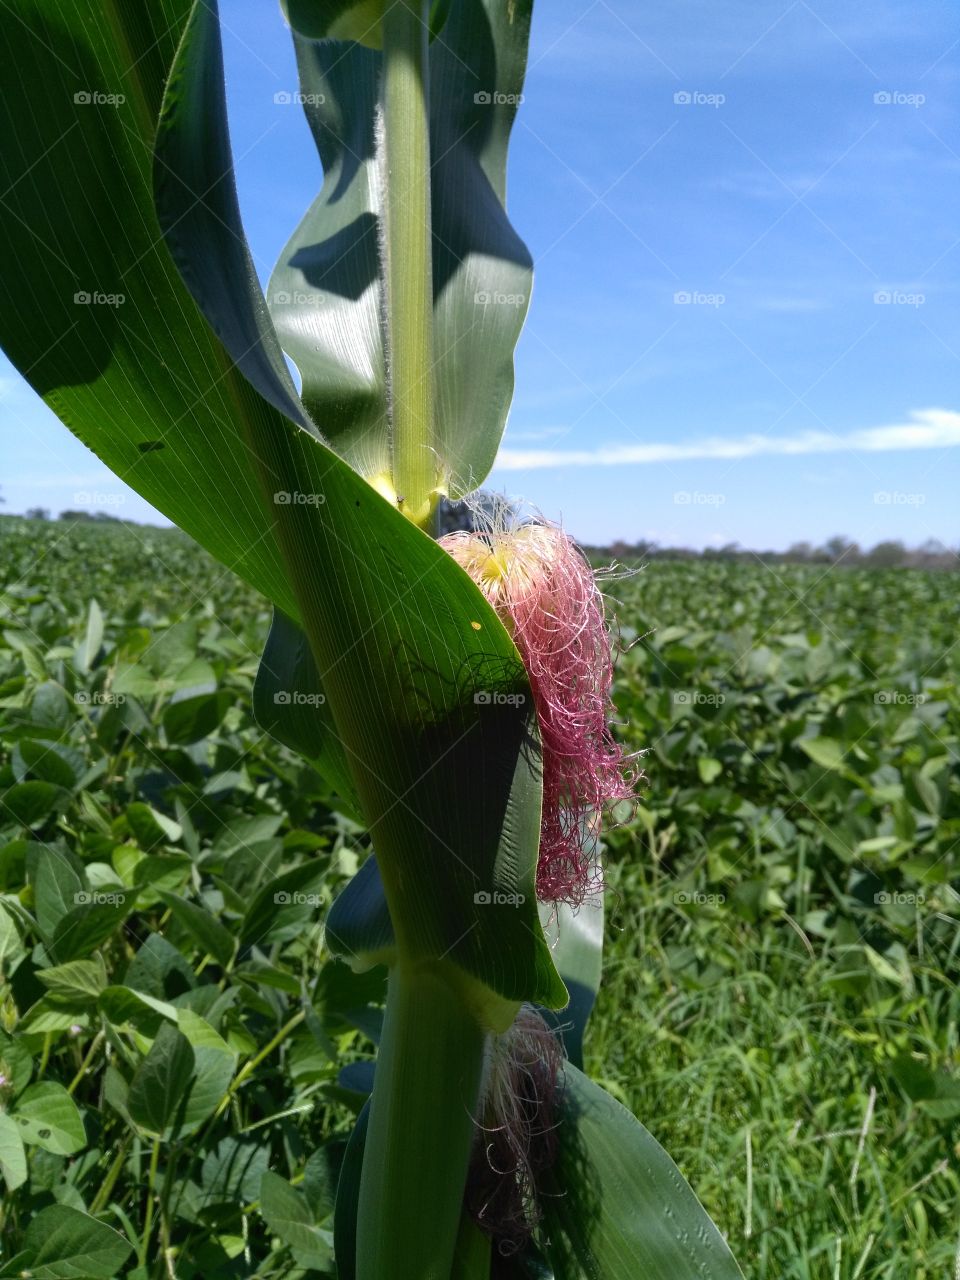 Corn stalk with green leaves and pink silk